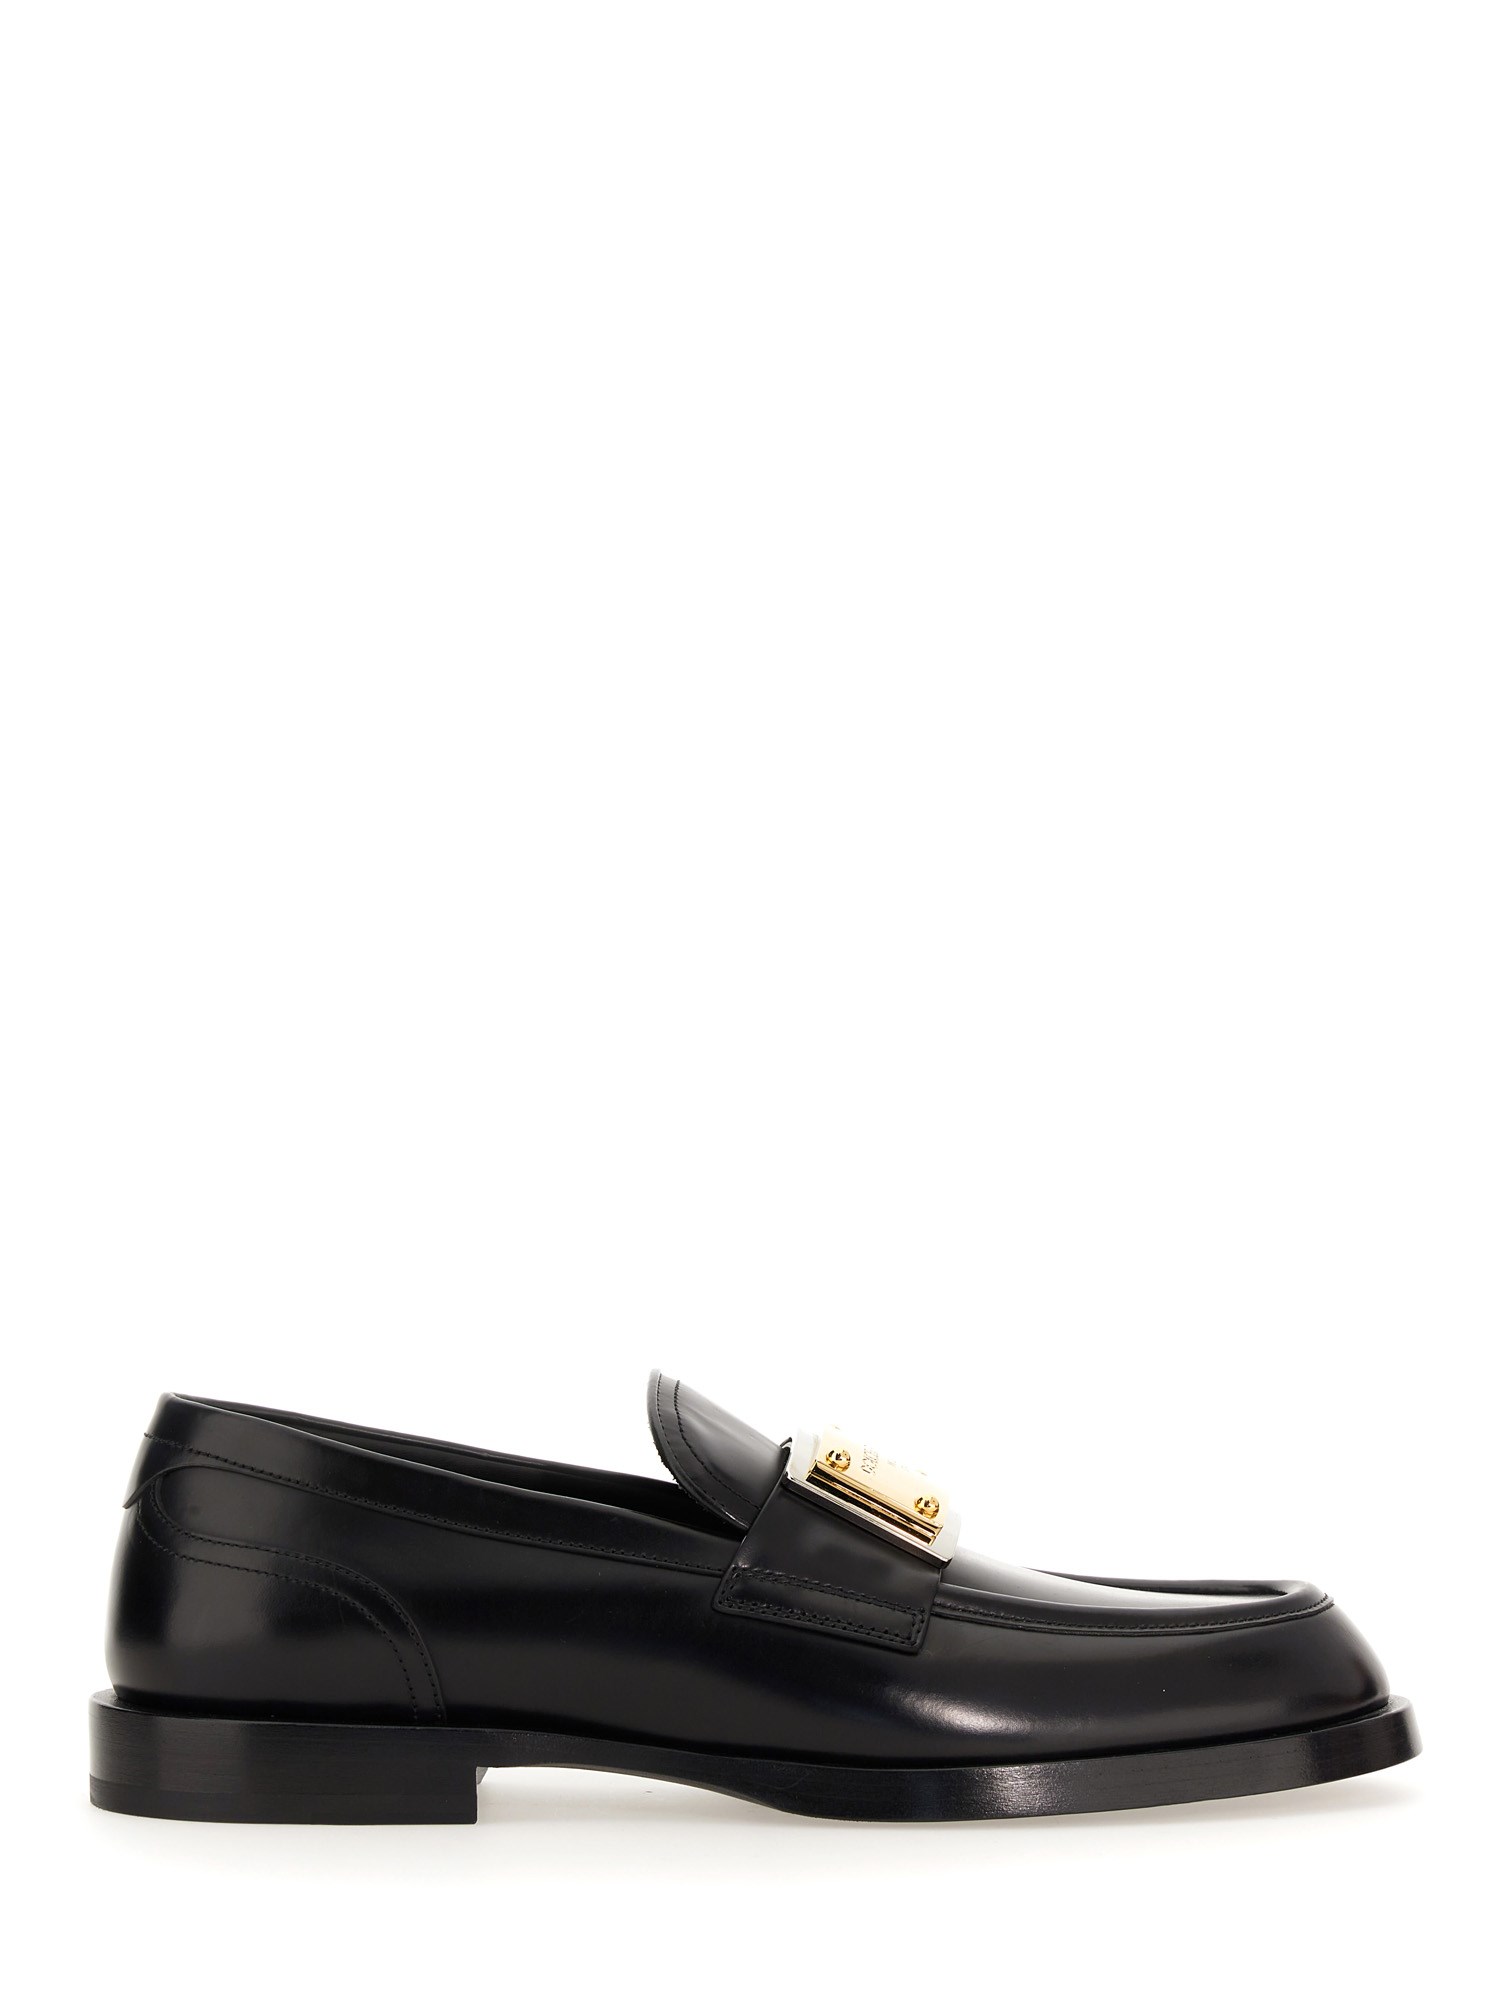 dolce & gabbana leather loafer